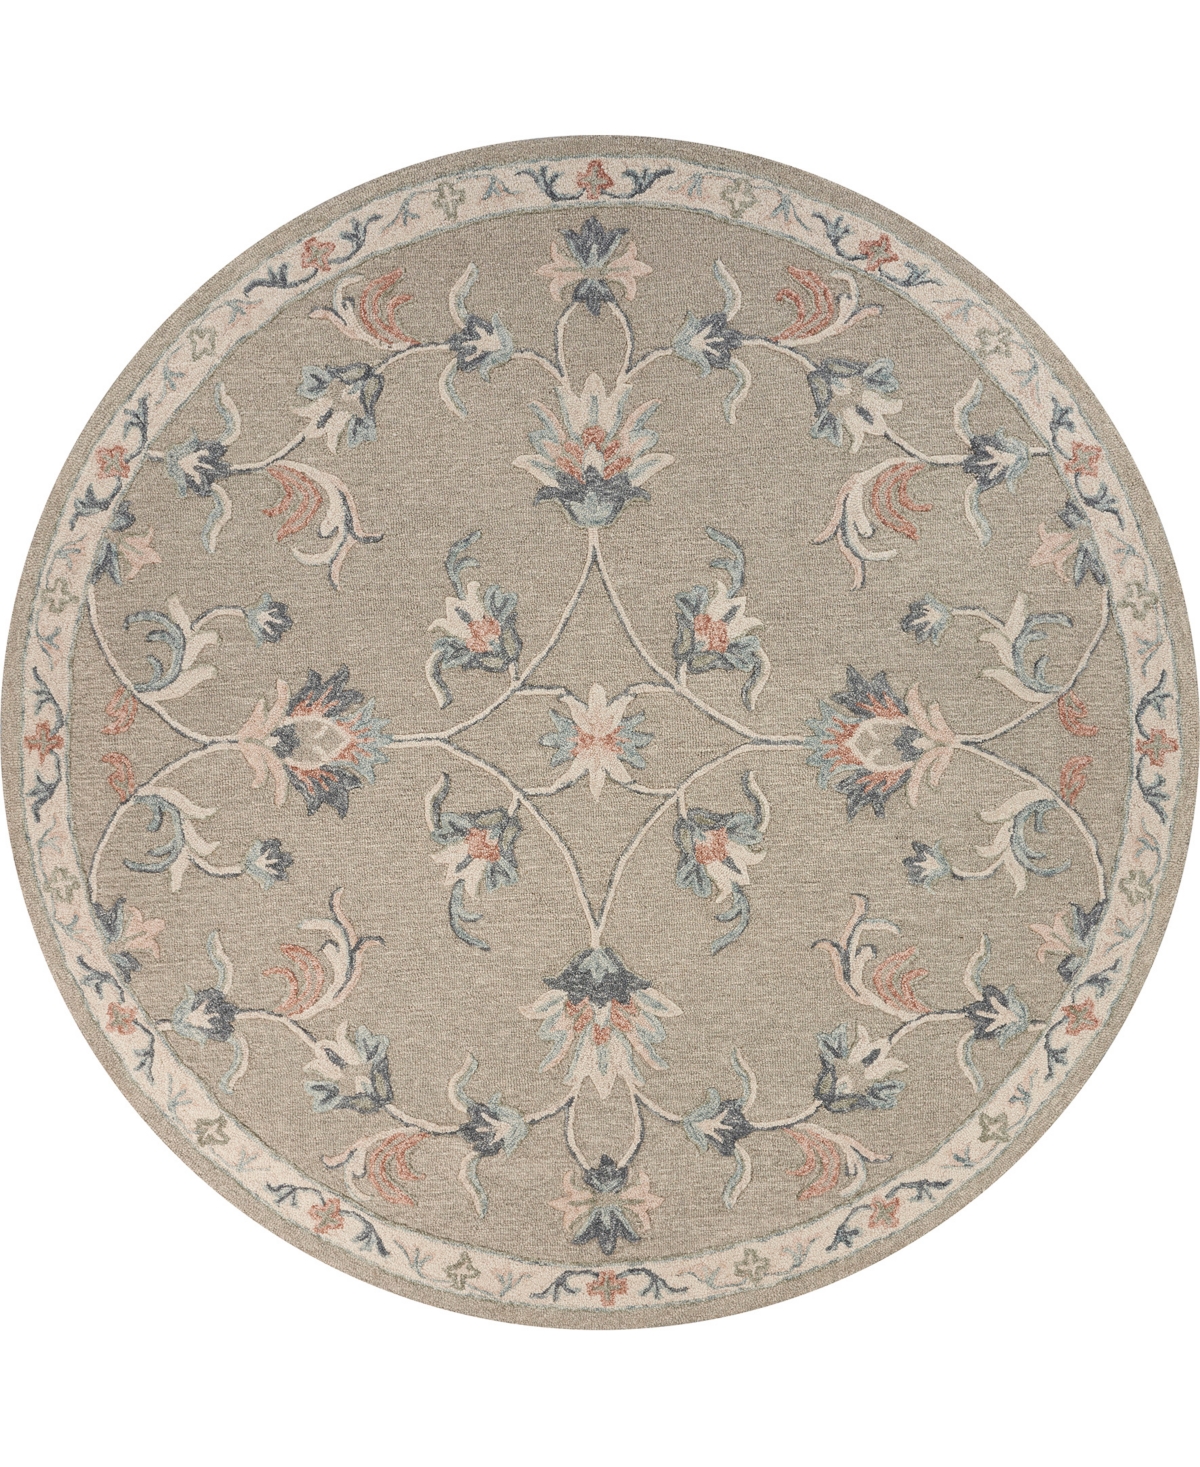 Lr Home Valiant Valnt81585 4'10" X 4'10" Round Area Rug In Silver